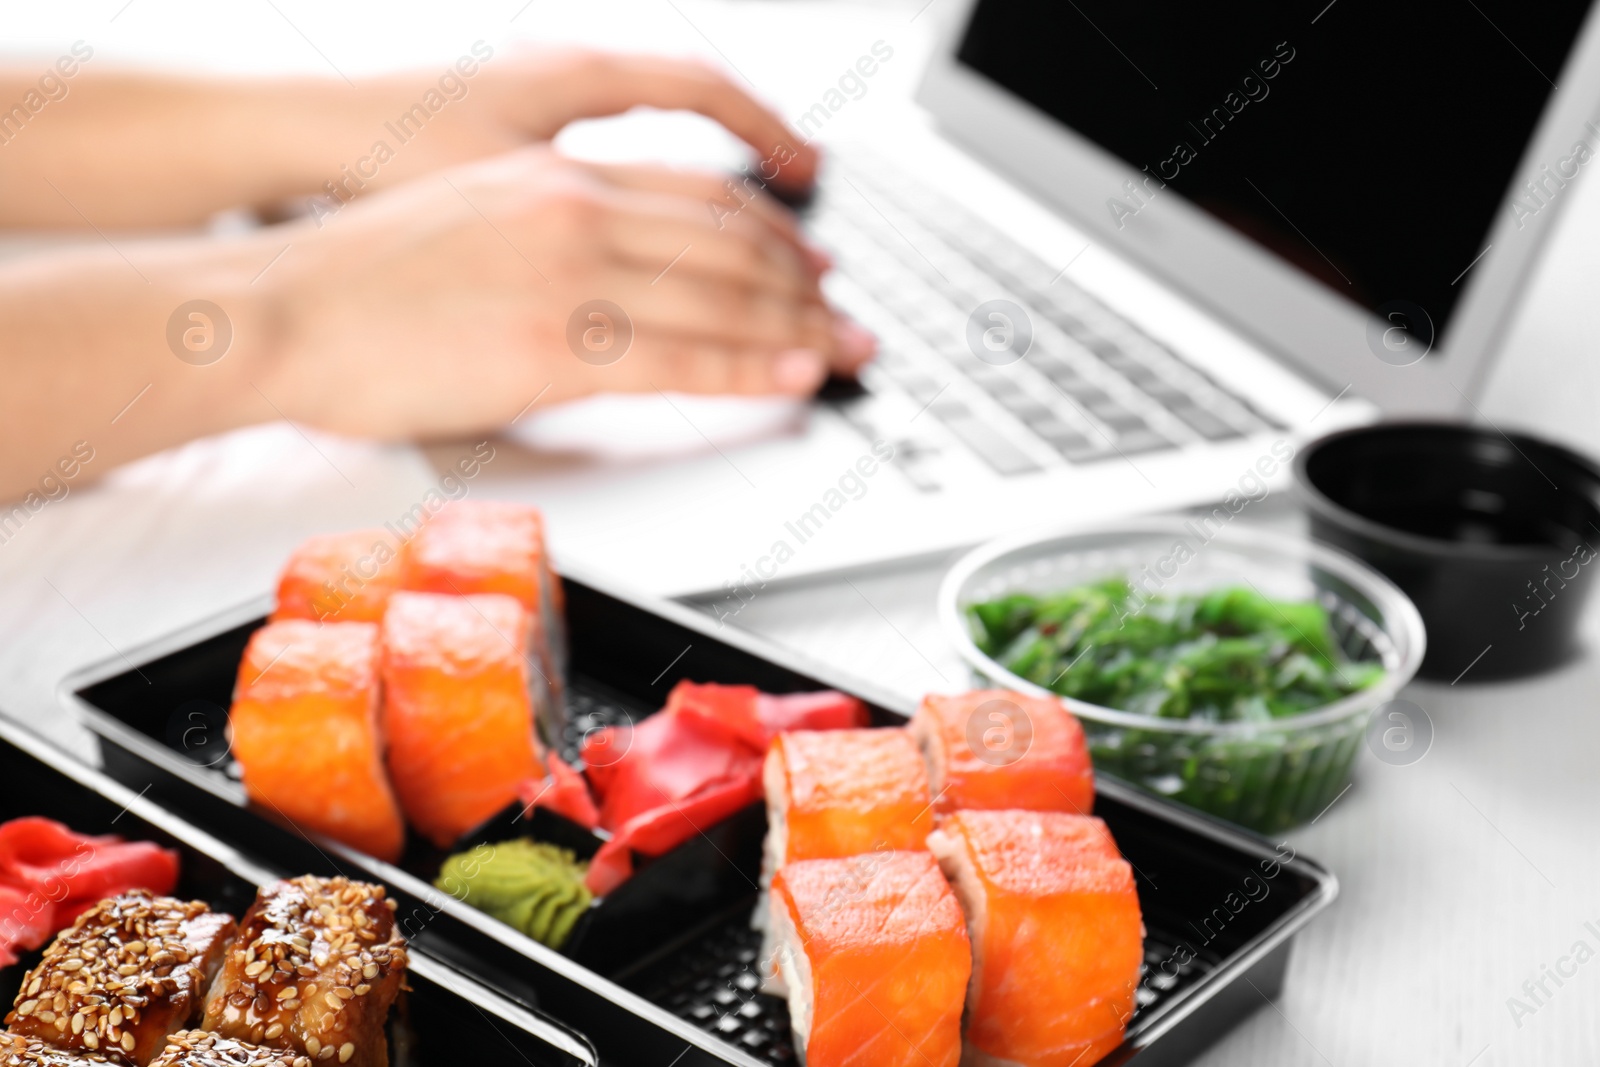 Photo of Boxes with different sushi rolls and blurred woman using laptop on background. Food delivery